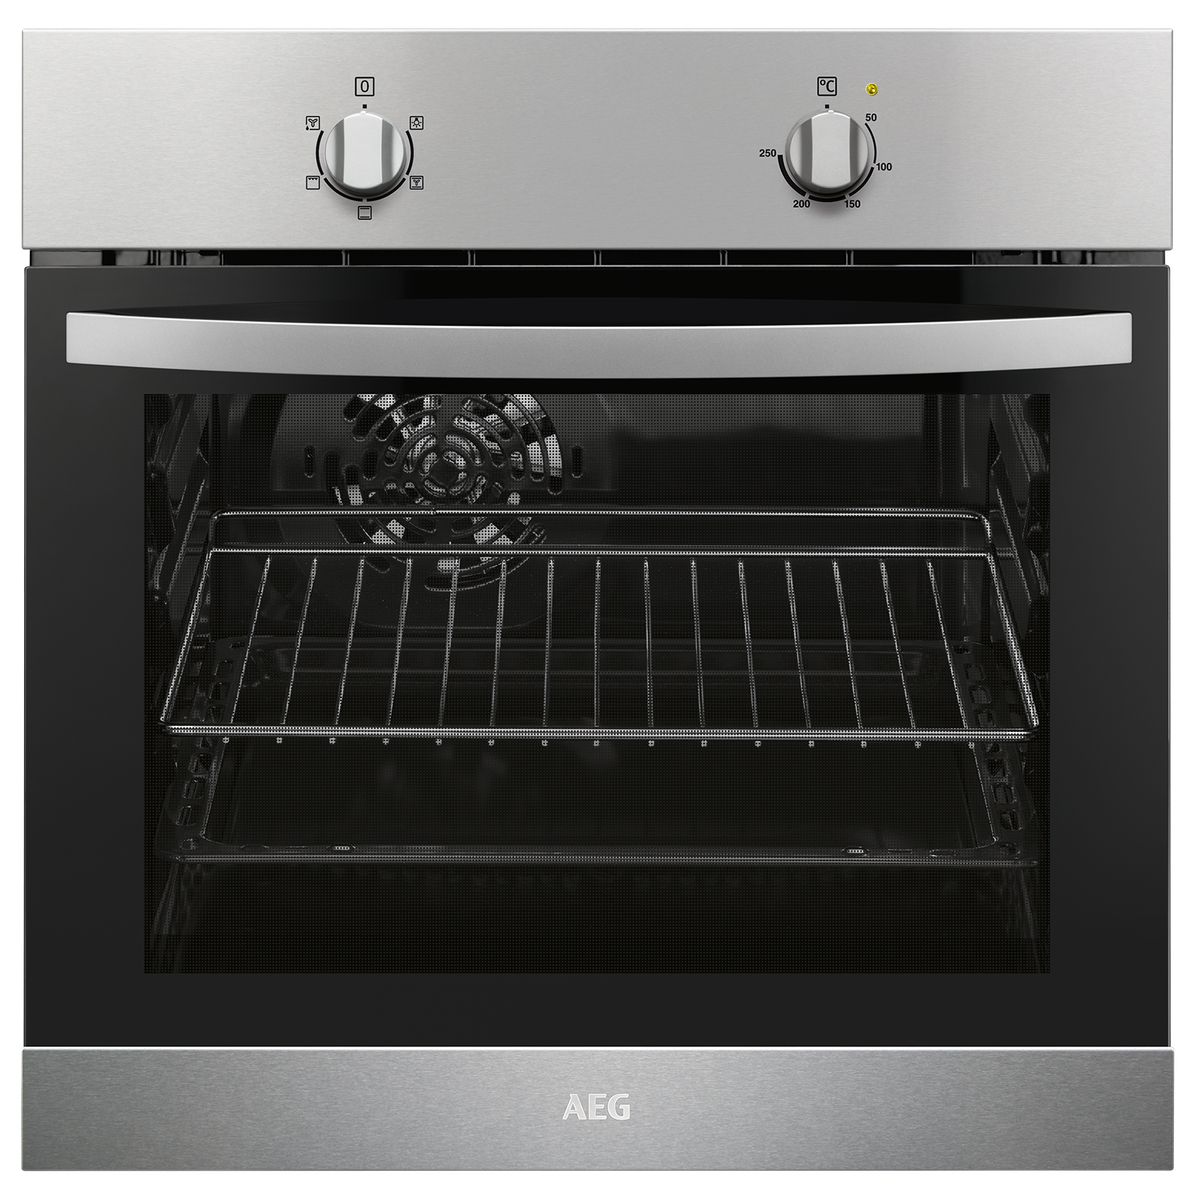 AEG 60cm Electric Multifunctional Built-in Oven